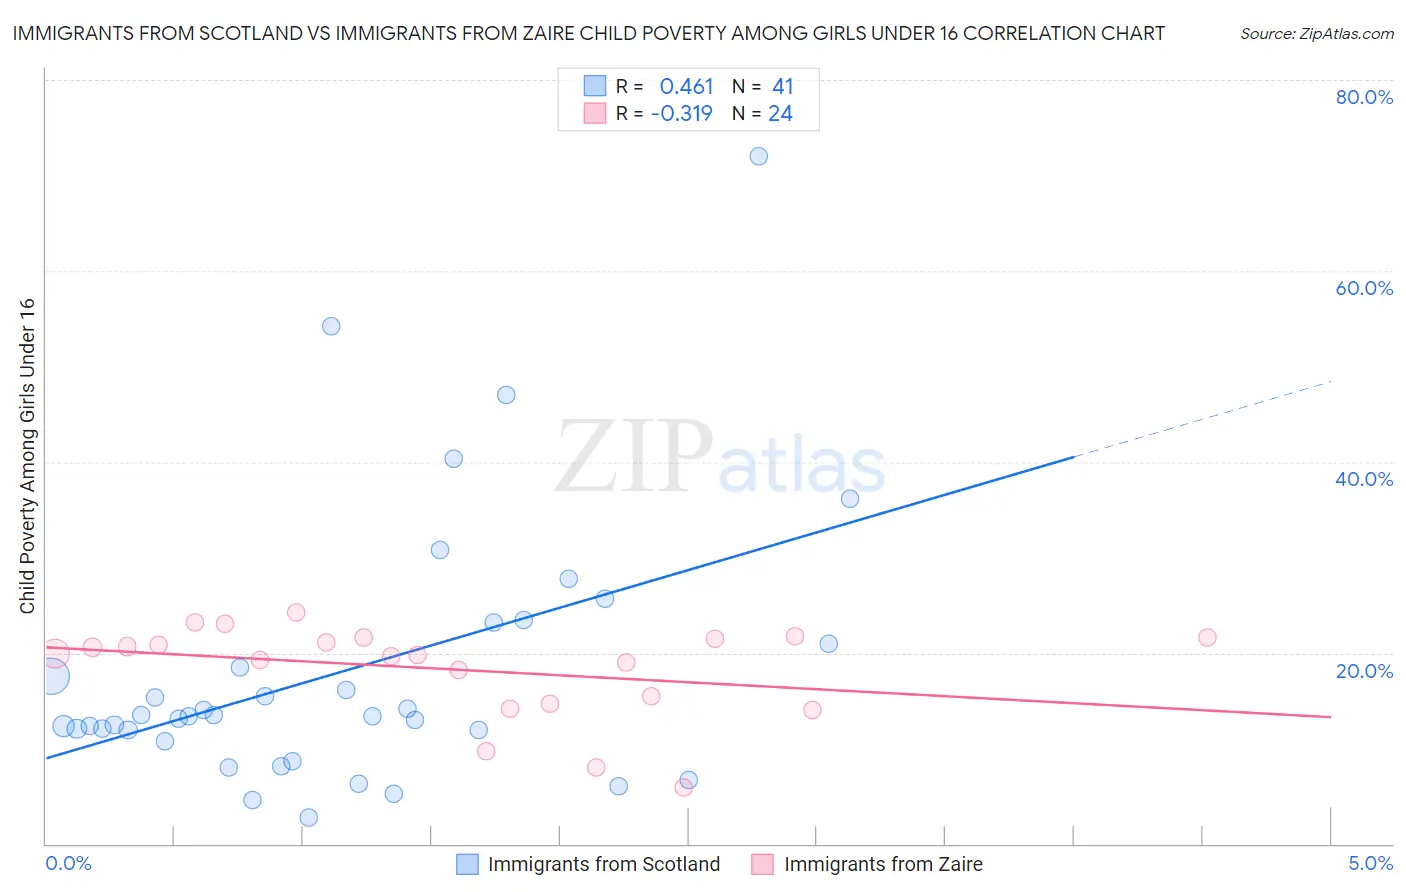 Immigrants from Scotland vs Immigrants from Zaire Child Poverty Among Girls Under 16